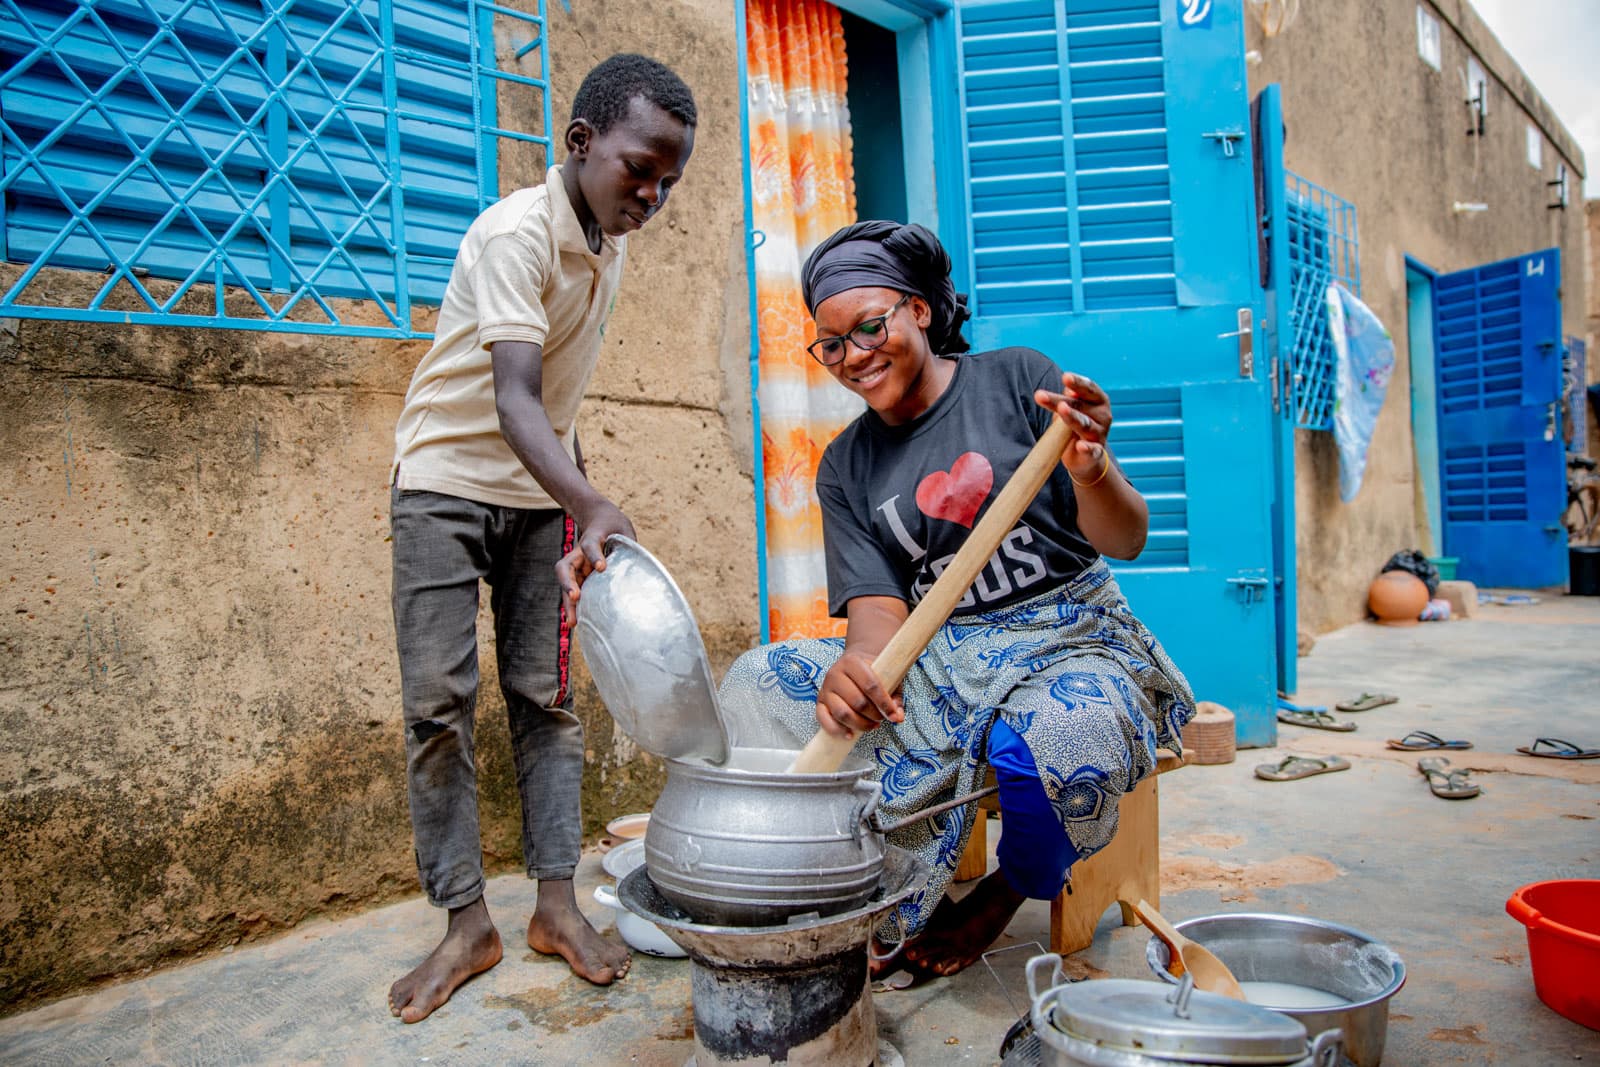 Adèle is wearing a black shirt that says, "I love Jesus." She is sitting down outside her home and is cooking. Her younger brother, Abdoul, wearing gray pants and a tan shirt, is helping her by pouring corn flour into her pot. Their home is behind them. It is tan with blue doors and shutters, and there is an orange and white curtain hanging in the doorway.